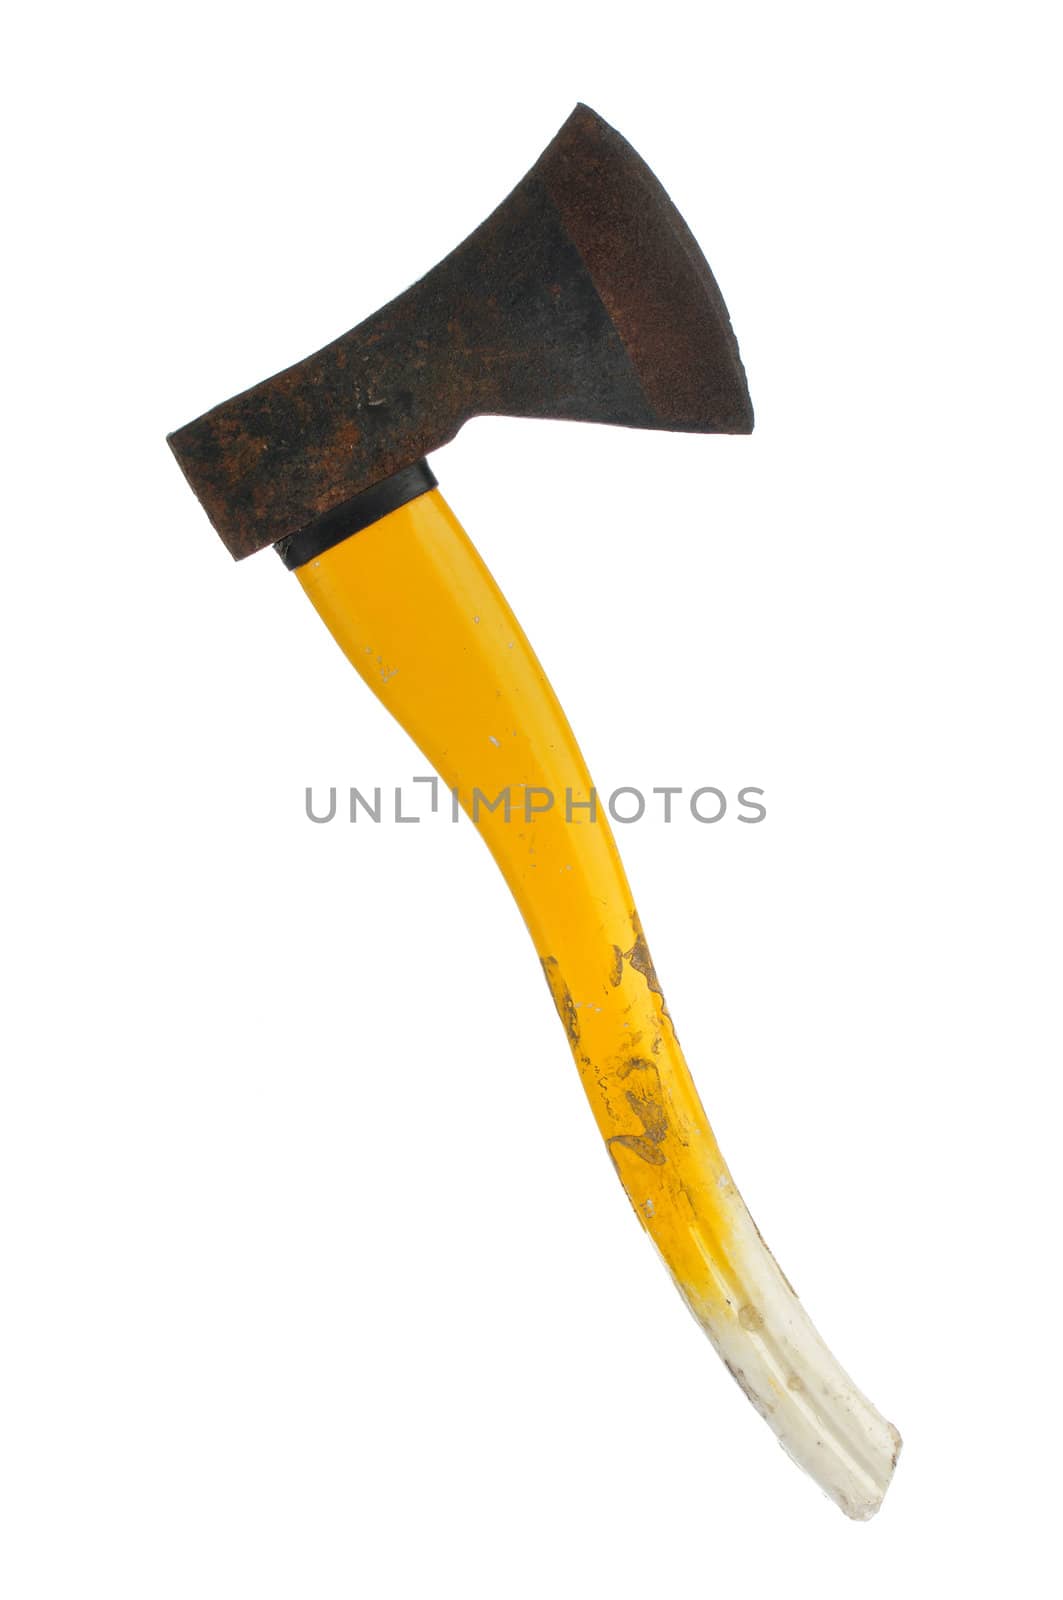 Old rusty ax with yellow handle isolated on white background